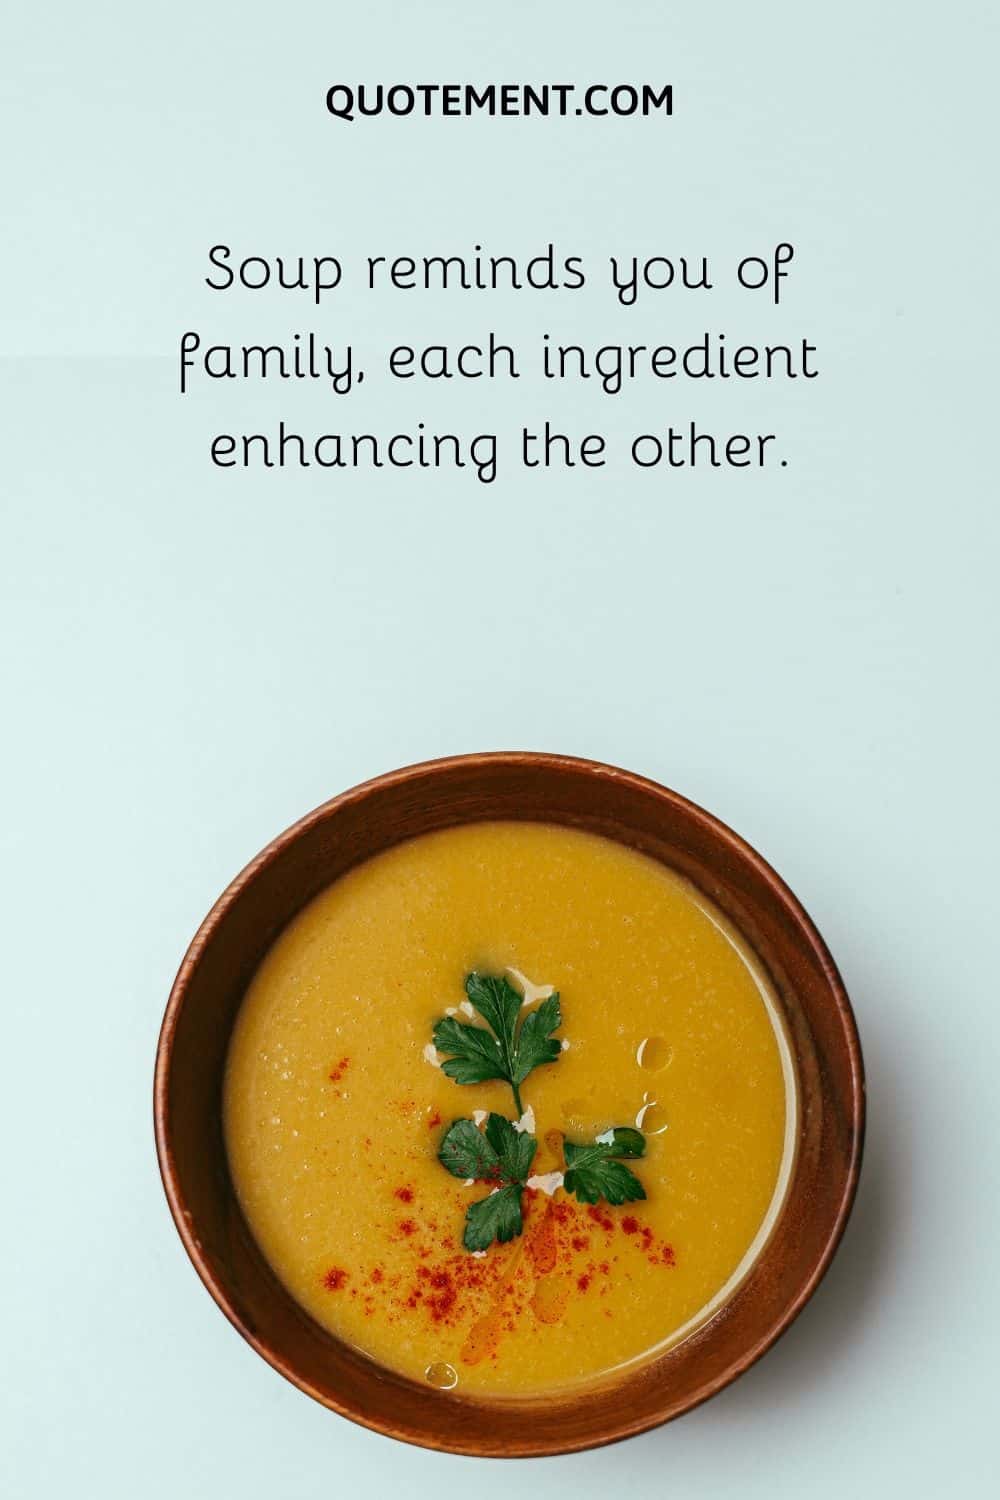 Soup reminds you of family